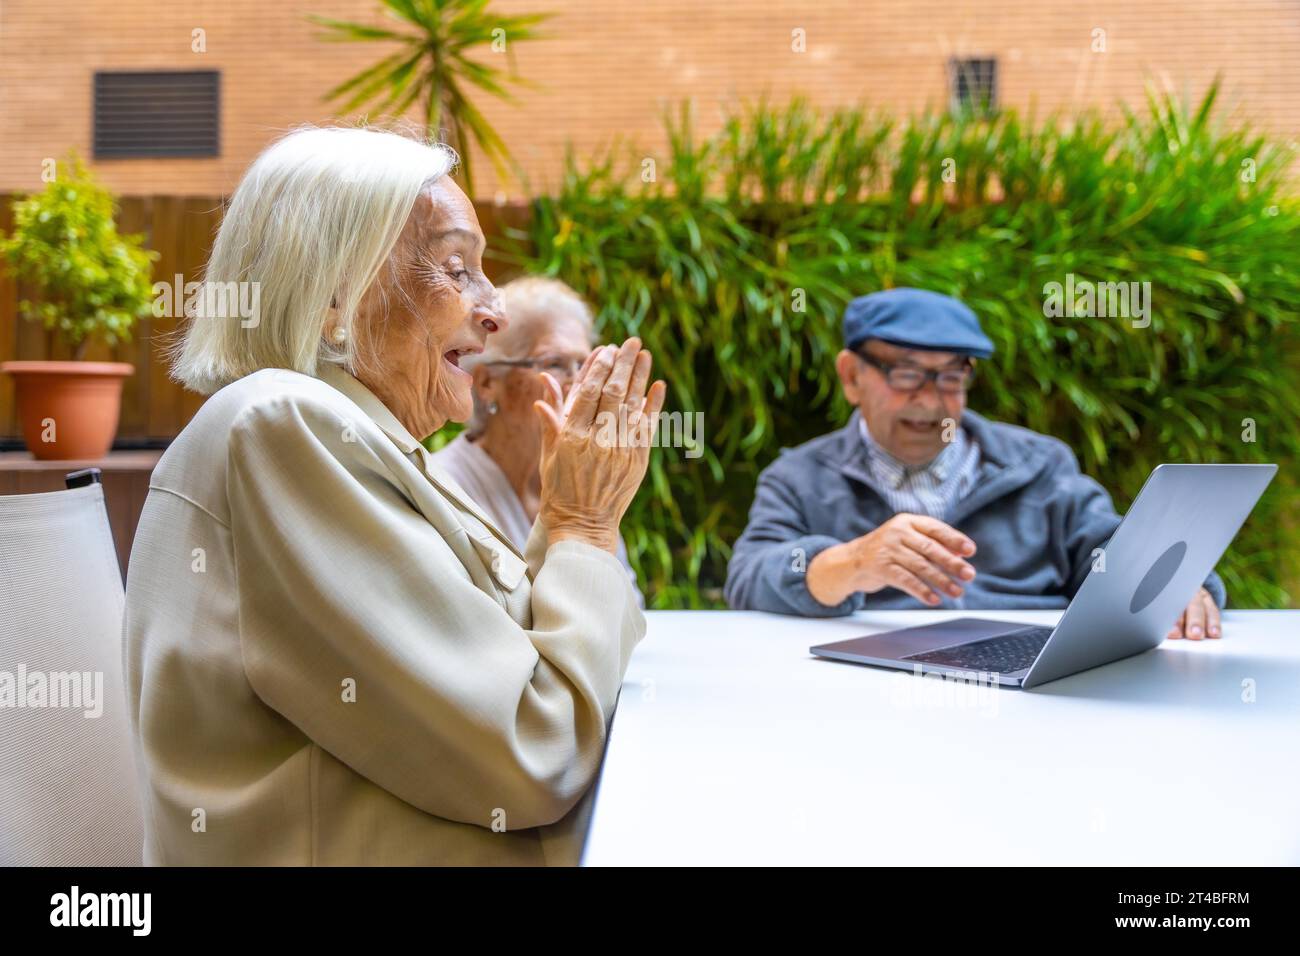 Senior people smiling and having fun using laptop in a geriatric Stock Photo